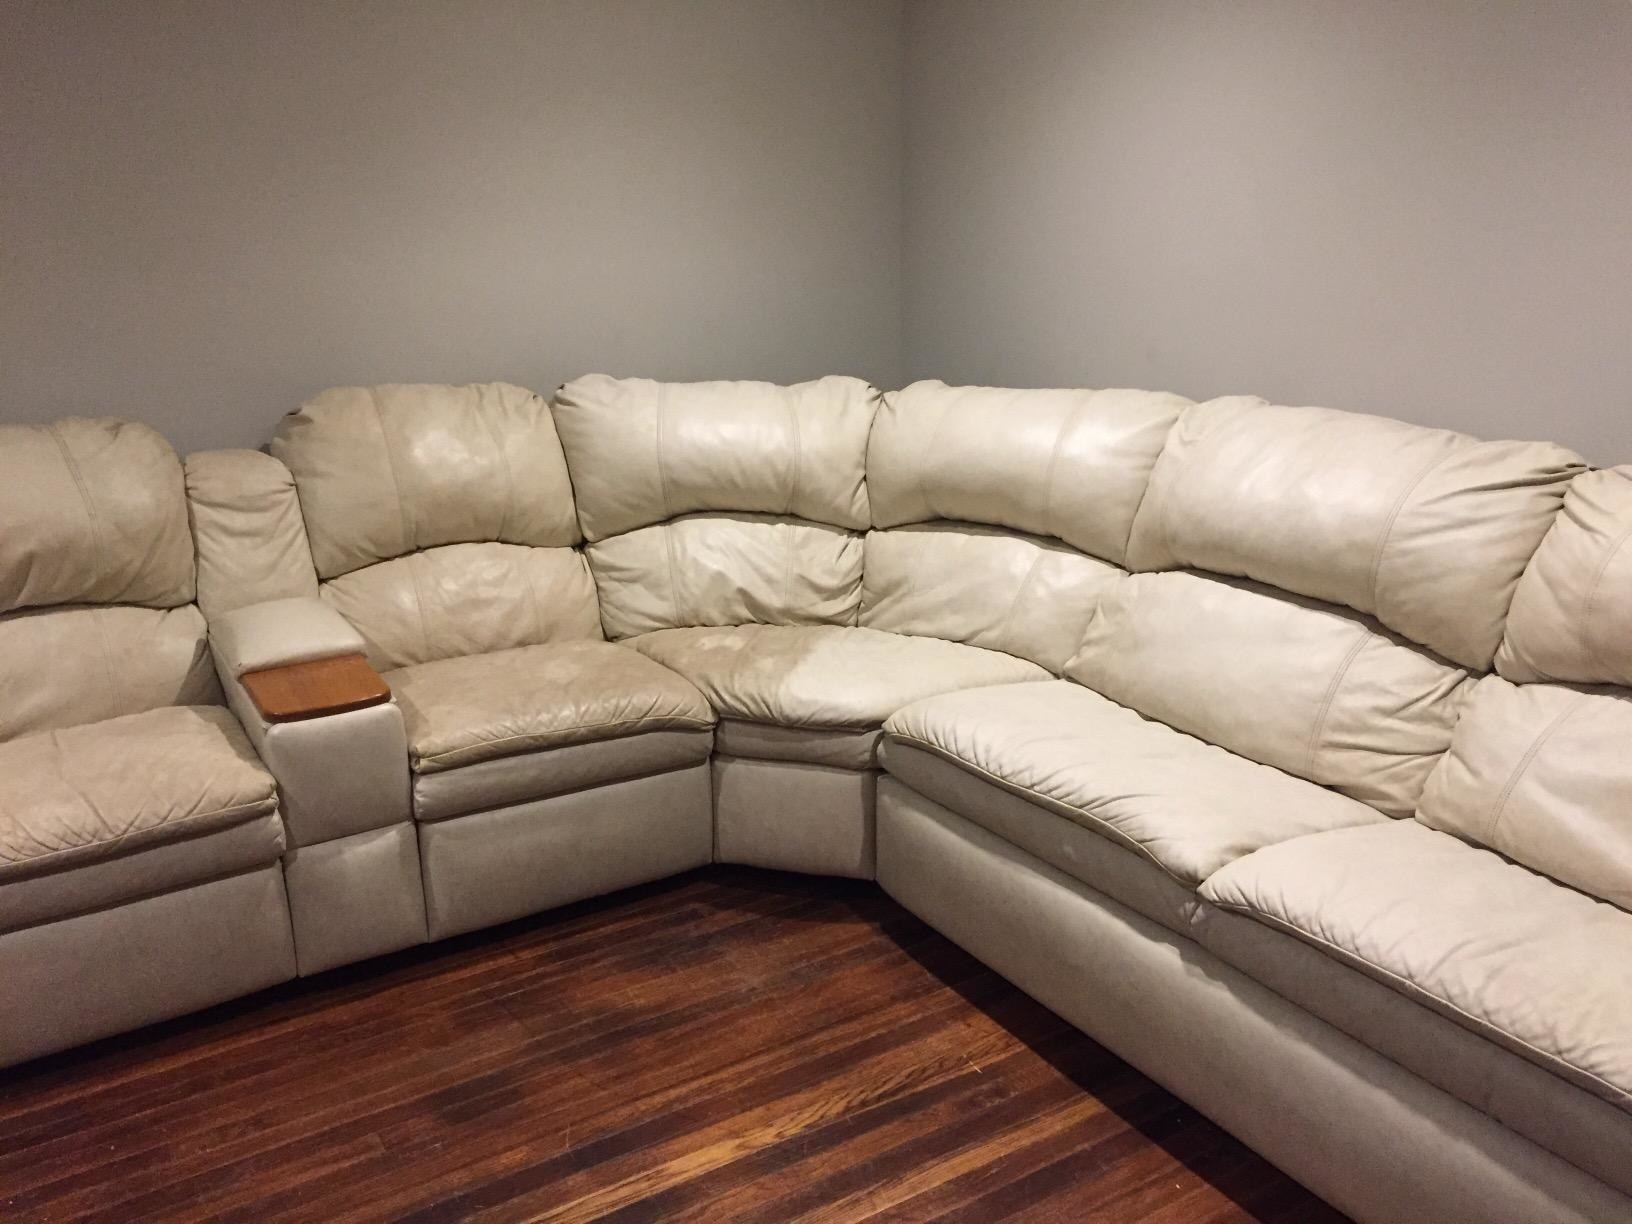 Reviewer's couch with one side cleaned with wood polishing cleaner